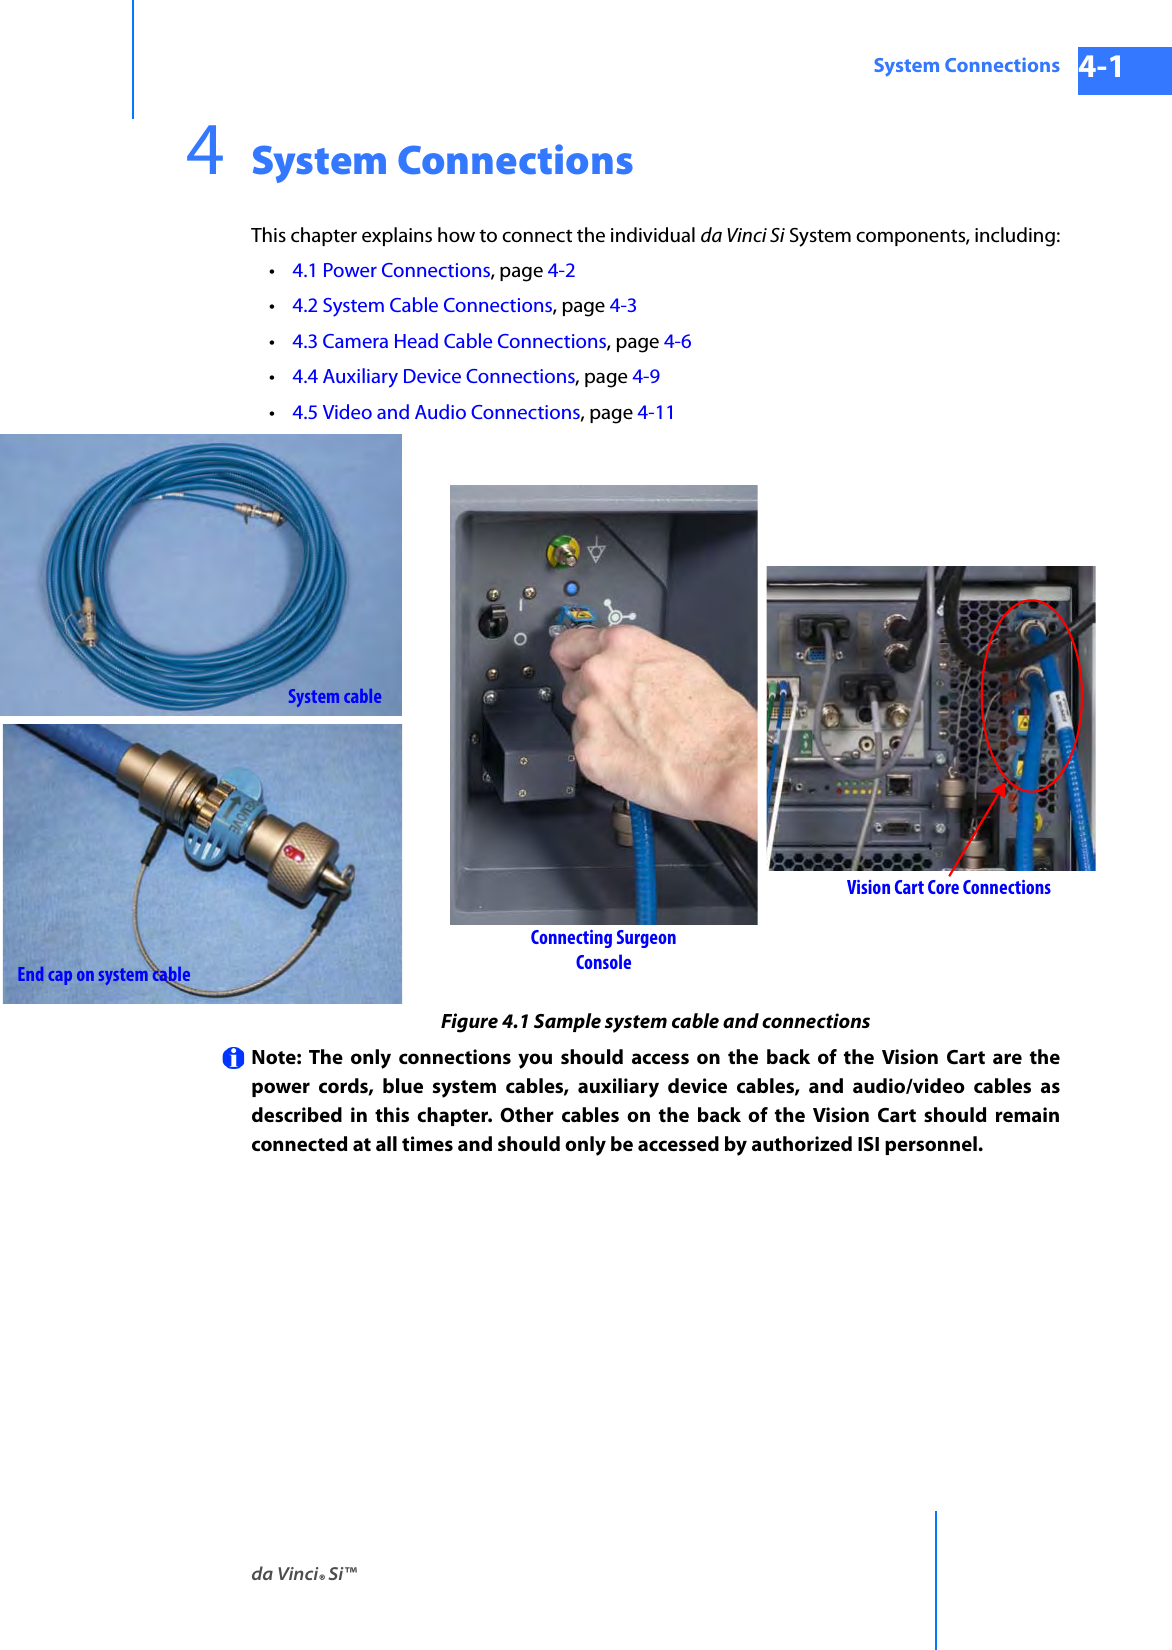 da Vinci® Si™System Connections 4-1DRAFT/PRE-RELEASE/CONFIDENTIAL 10/9/144System ConnectionsThis chapter explains how to connect the individual da Vinci Si System components, including:•4.1 Power Connections, page 4-2•4.2 System Cable Connections, page 4-3 •4.3 Camera Head Cable Connections, page 4-6•4.4 Auxiliary Device Connections, page 4-9•4.5 Video and Audio Connections, page 4-11Figure 4.1 Sample system cable and connectionsNote: The only connections you should access on the back of the Vision Cart are the power cords, blue system cables, auxiliary device cables, and audio/video cables as described in this chapter. Other cables on the back of the Vision Cart should remain connected at all times and should only be accessed by authorized ISI personnel.Vision Cart Core ConnectionsConnecting Surgeon ConsoleSystem cableEnd cap on system cable